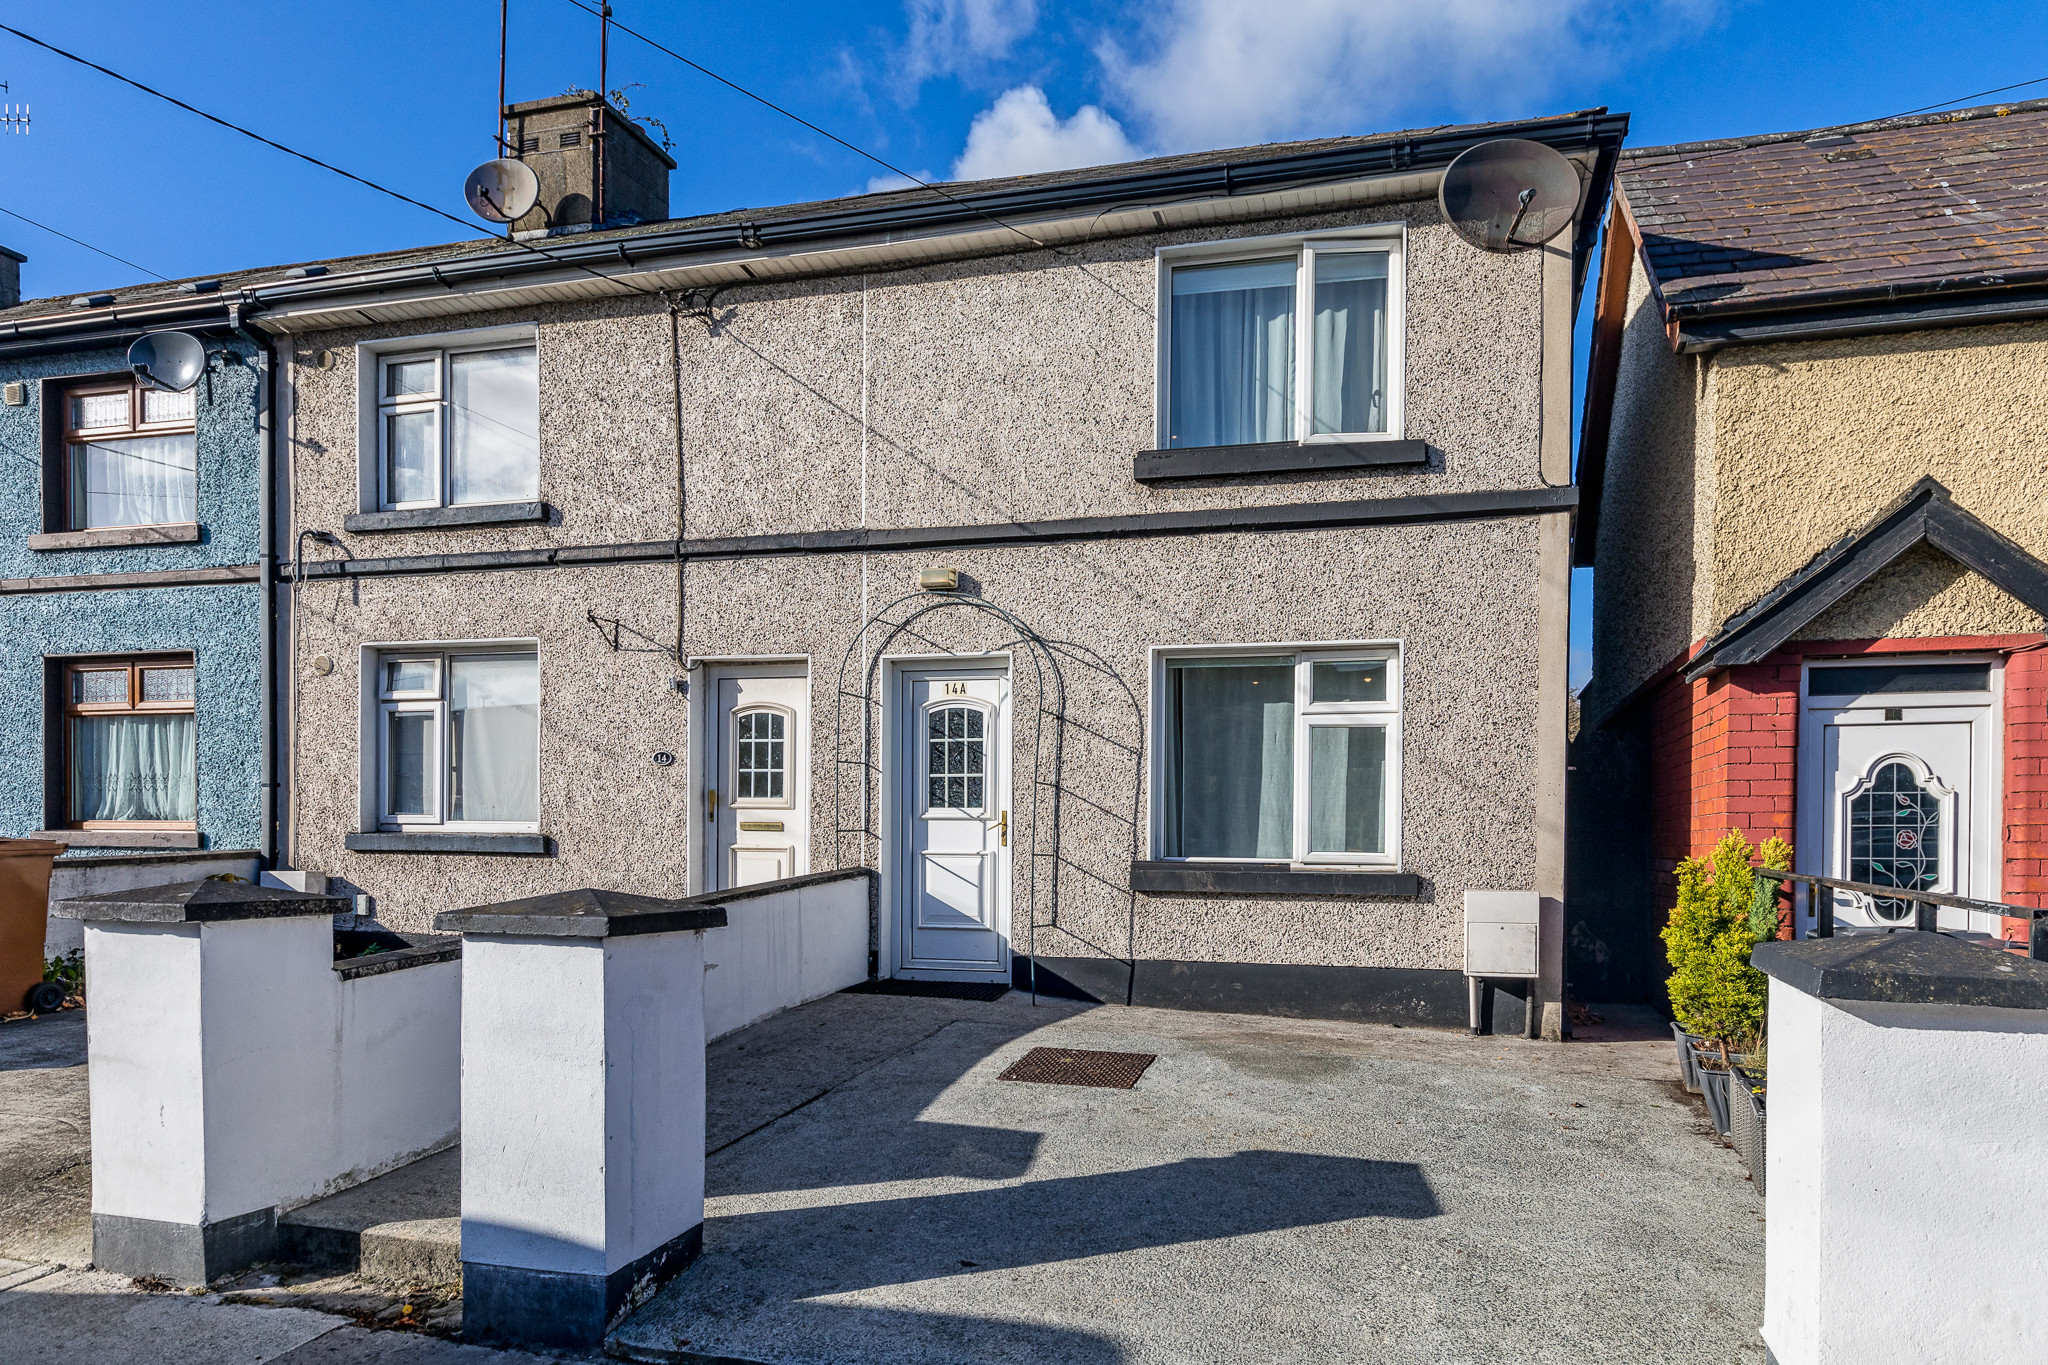 14A Platin Road Drogheda Co Louth